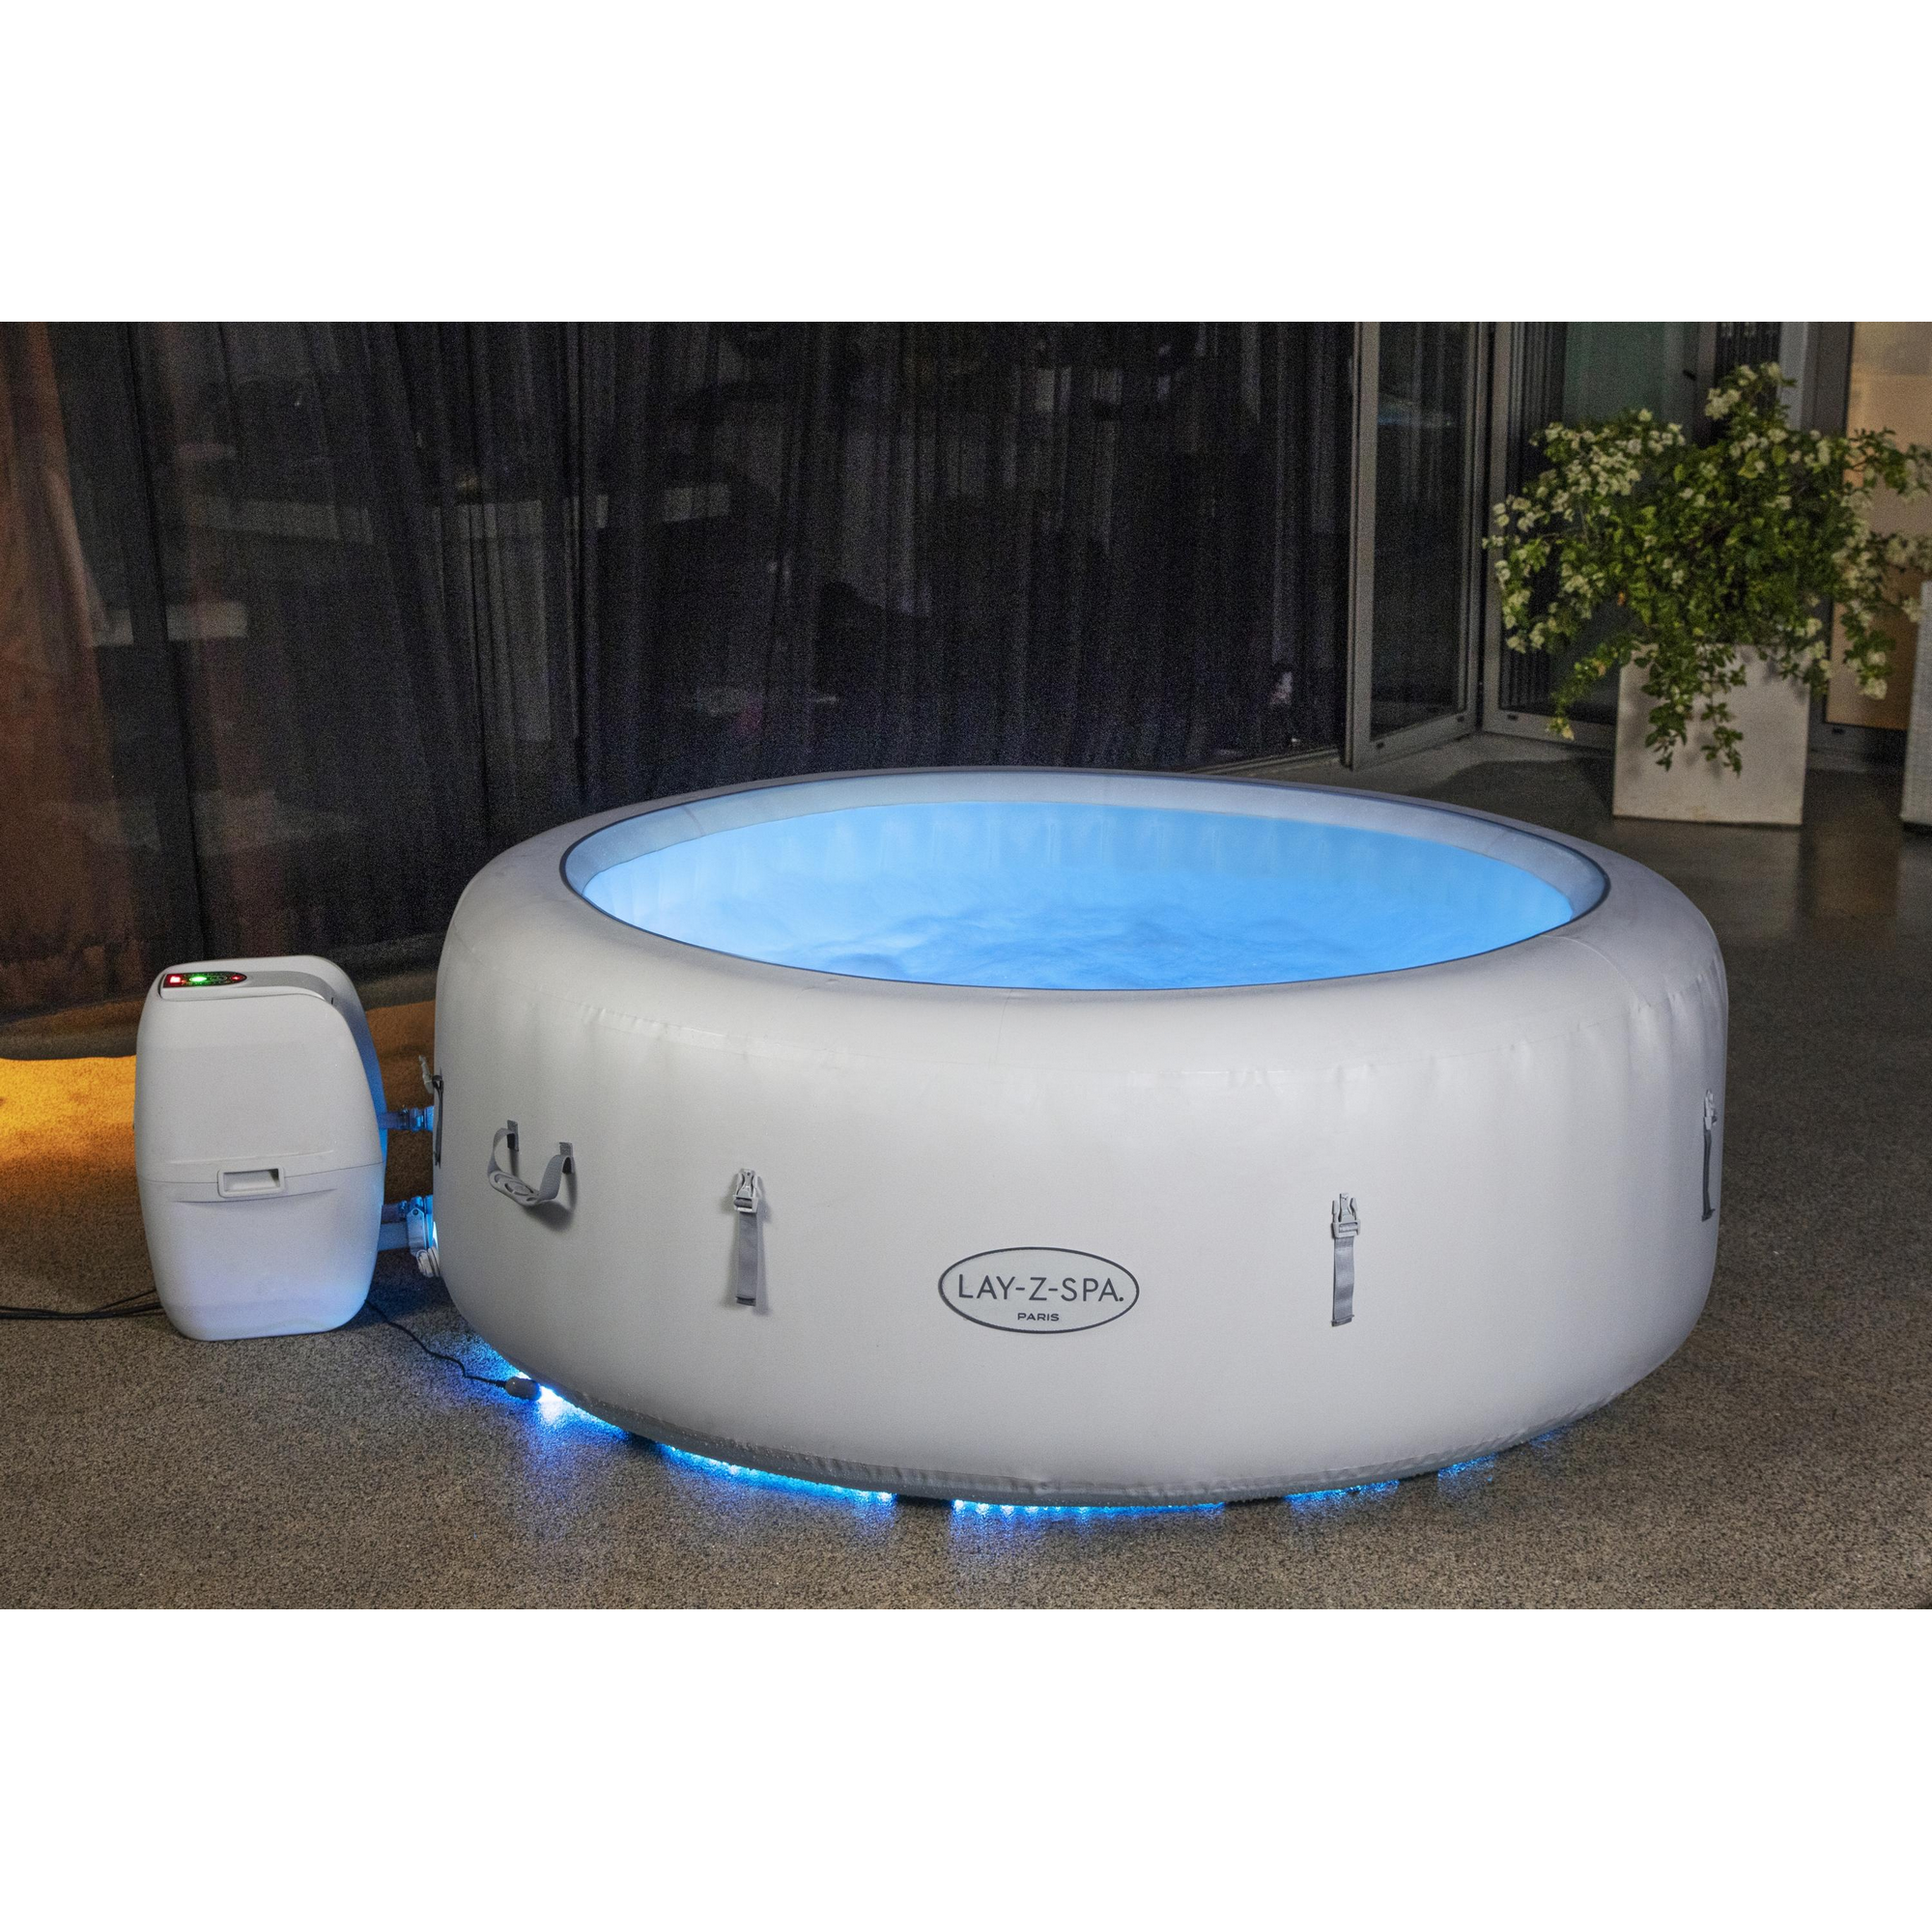 Whirlpool 'Lay-Z-Spa™ Paris AirJet' weiß Ø 196 x 66 cm + product picture